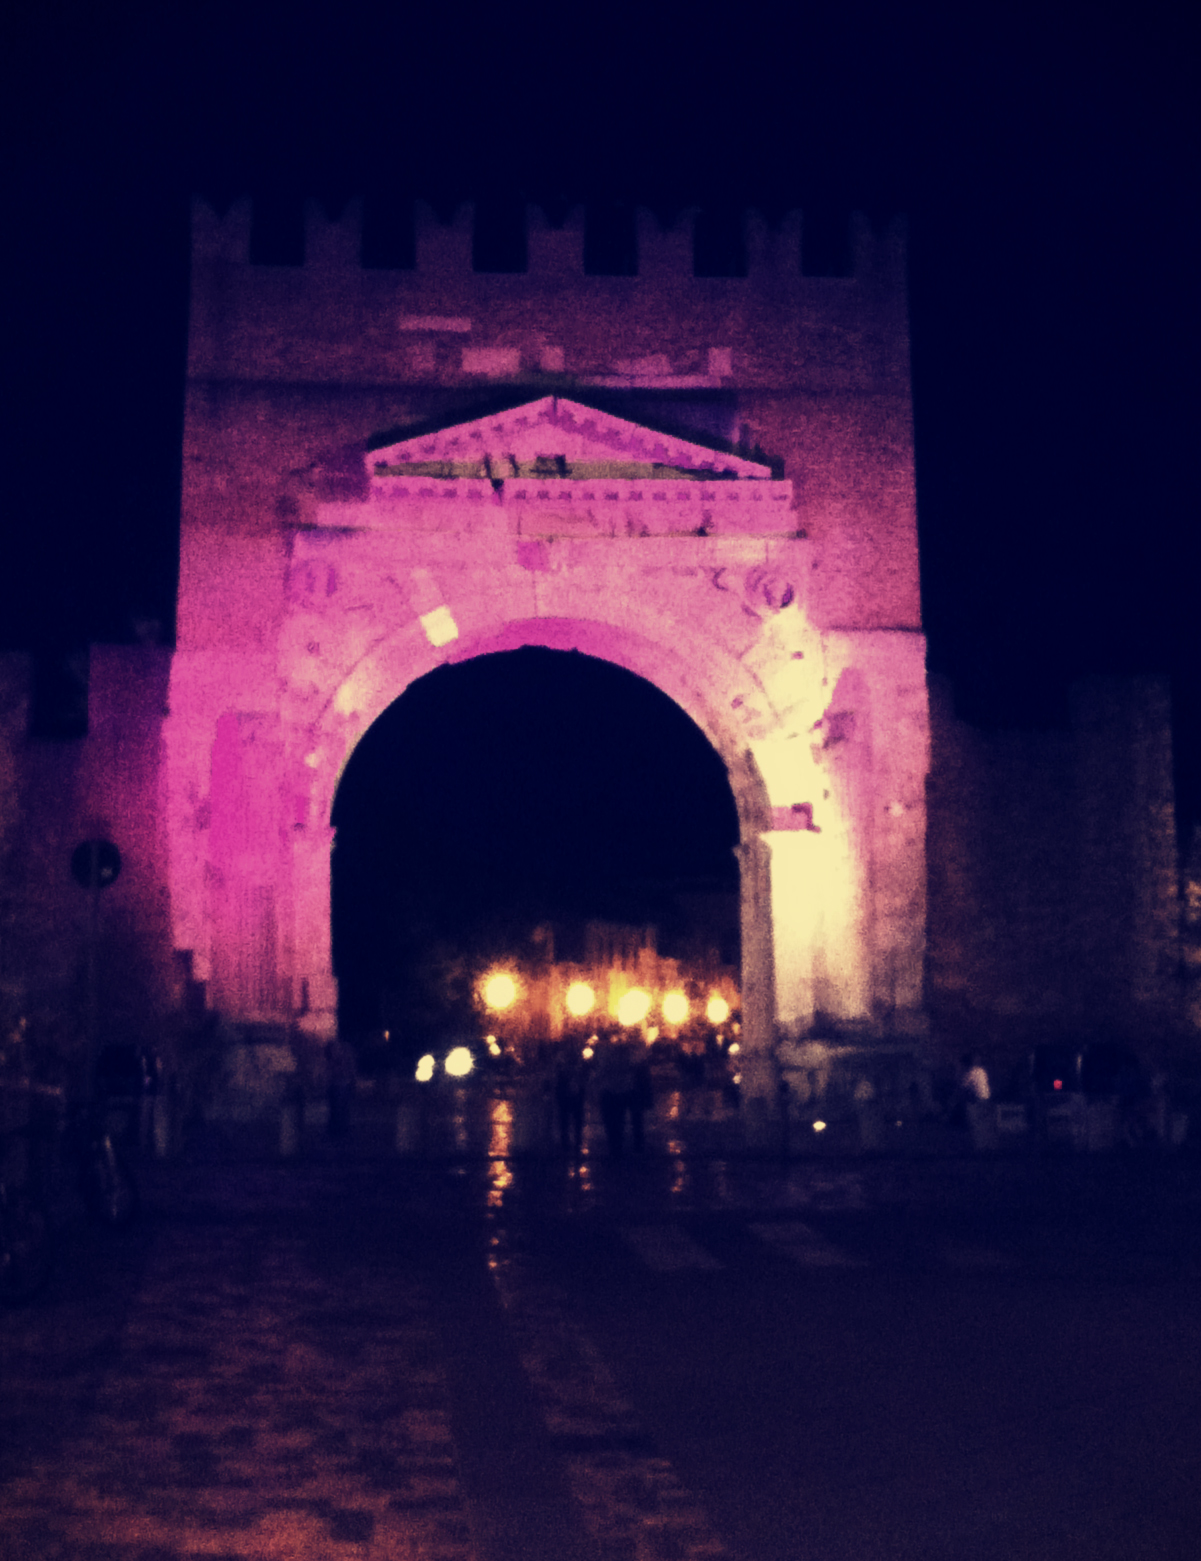 The Arco d'Augosto lit up in preparation for the Notte Rosa